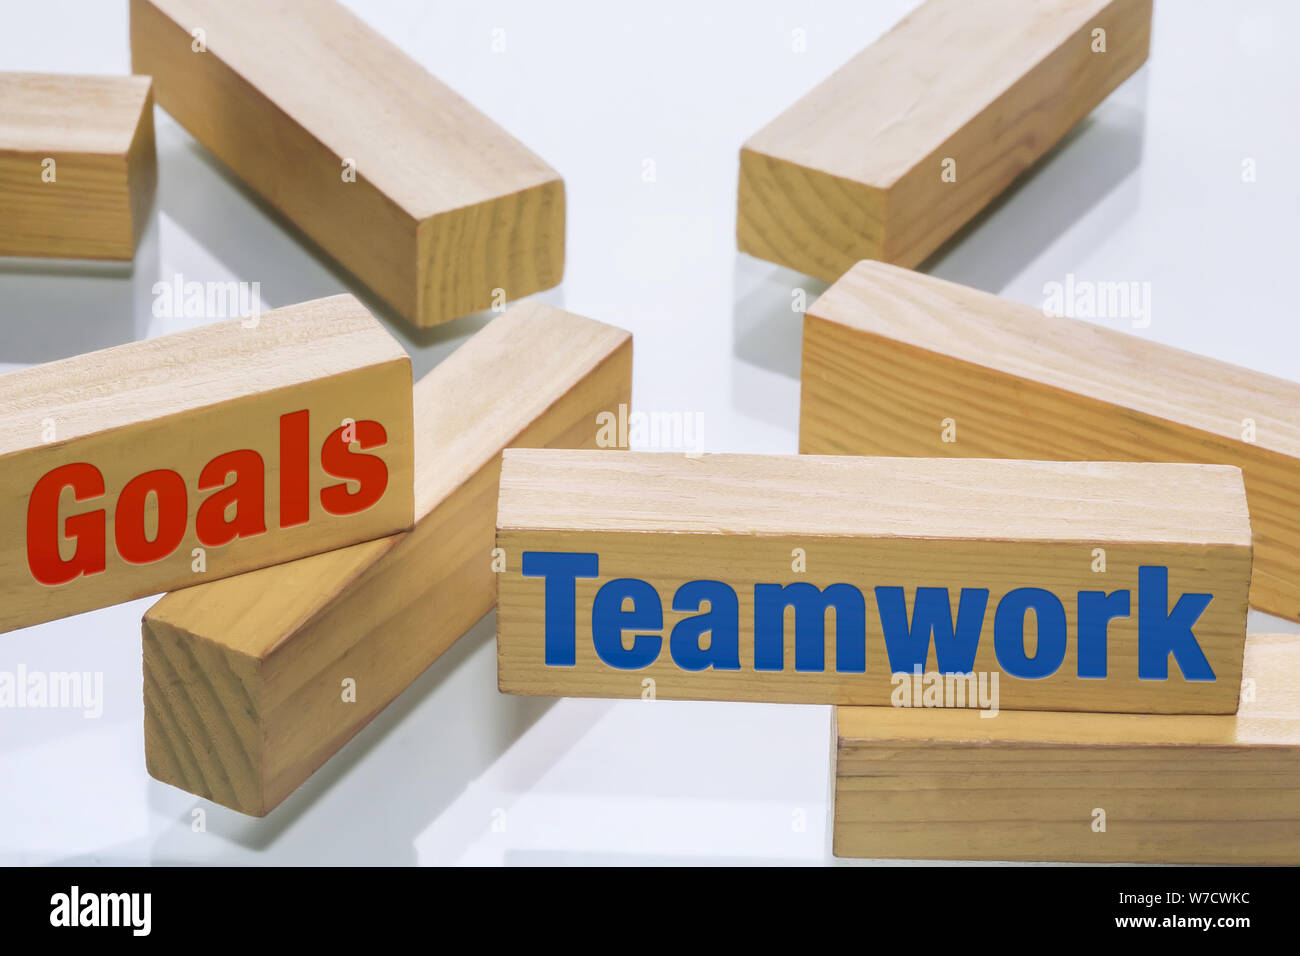 Building wooden blocks arranged to show collaboration between different company departments to achieve goals and encourage teamwork. Stock Photo